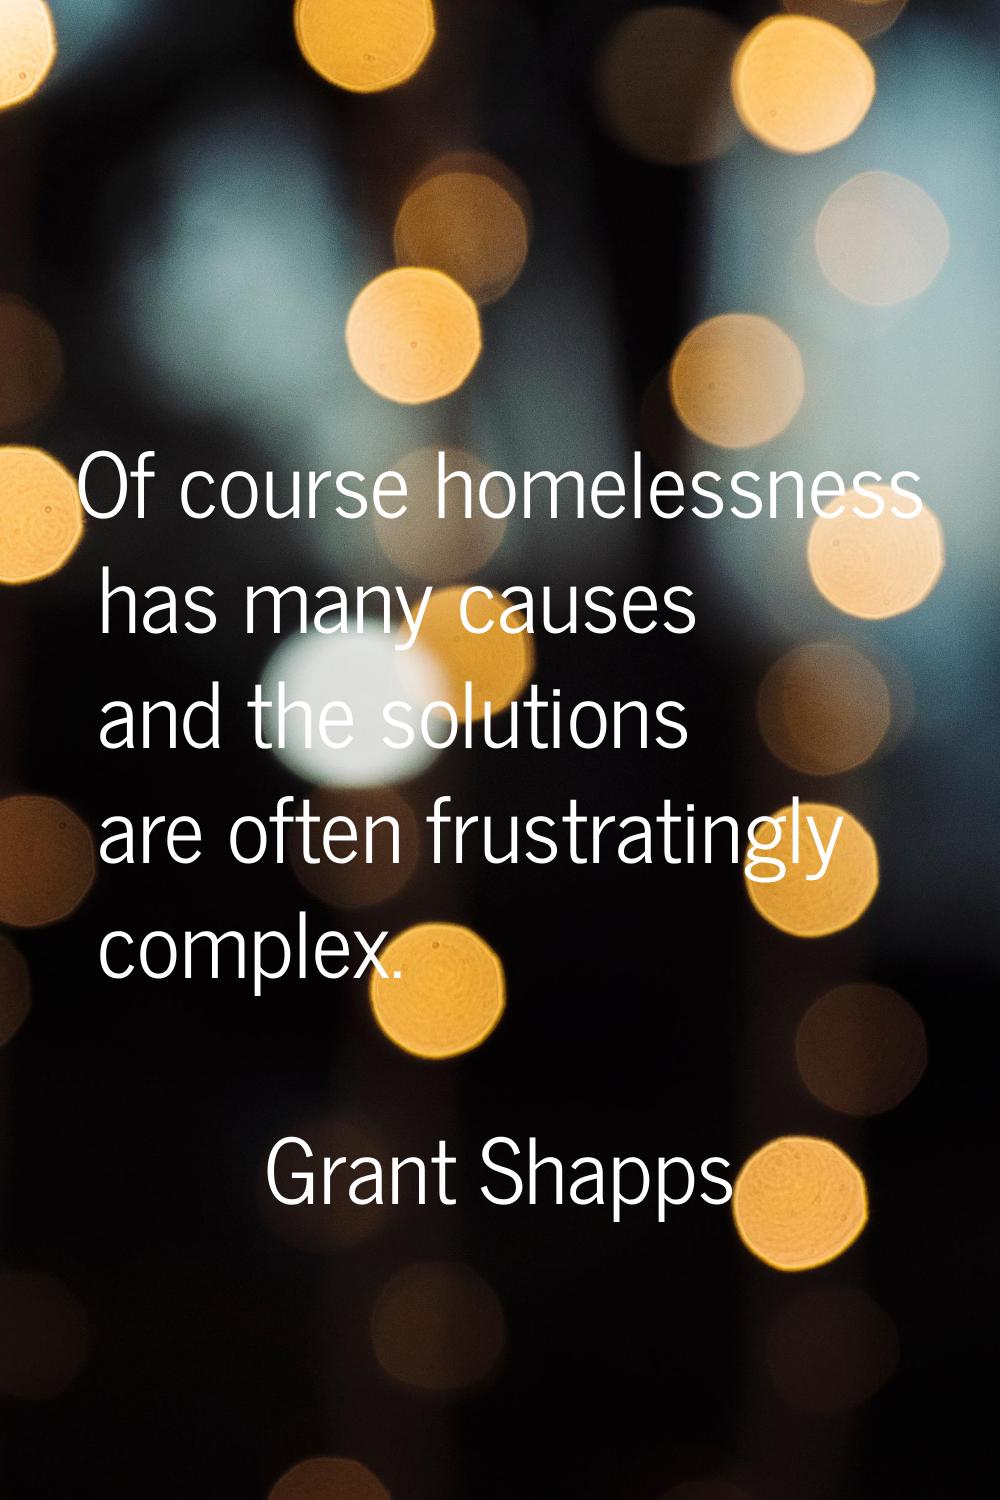 Of course homelessness has many causes and the solutions are often frustratingly complex.